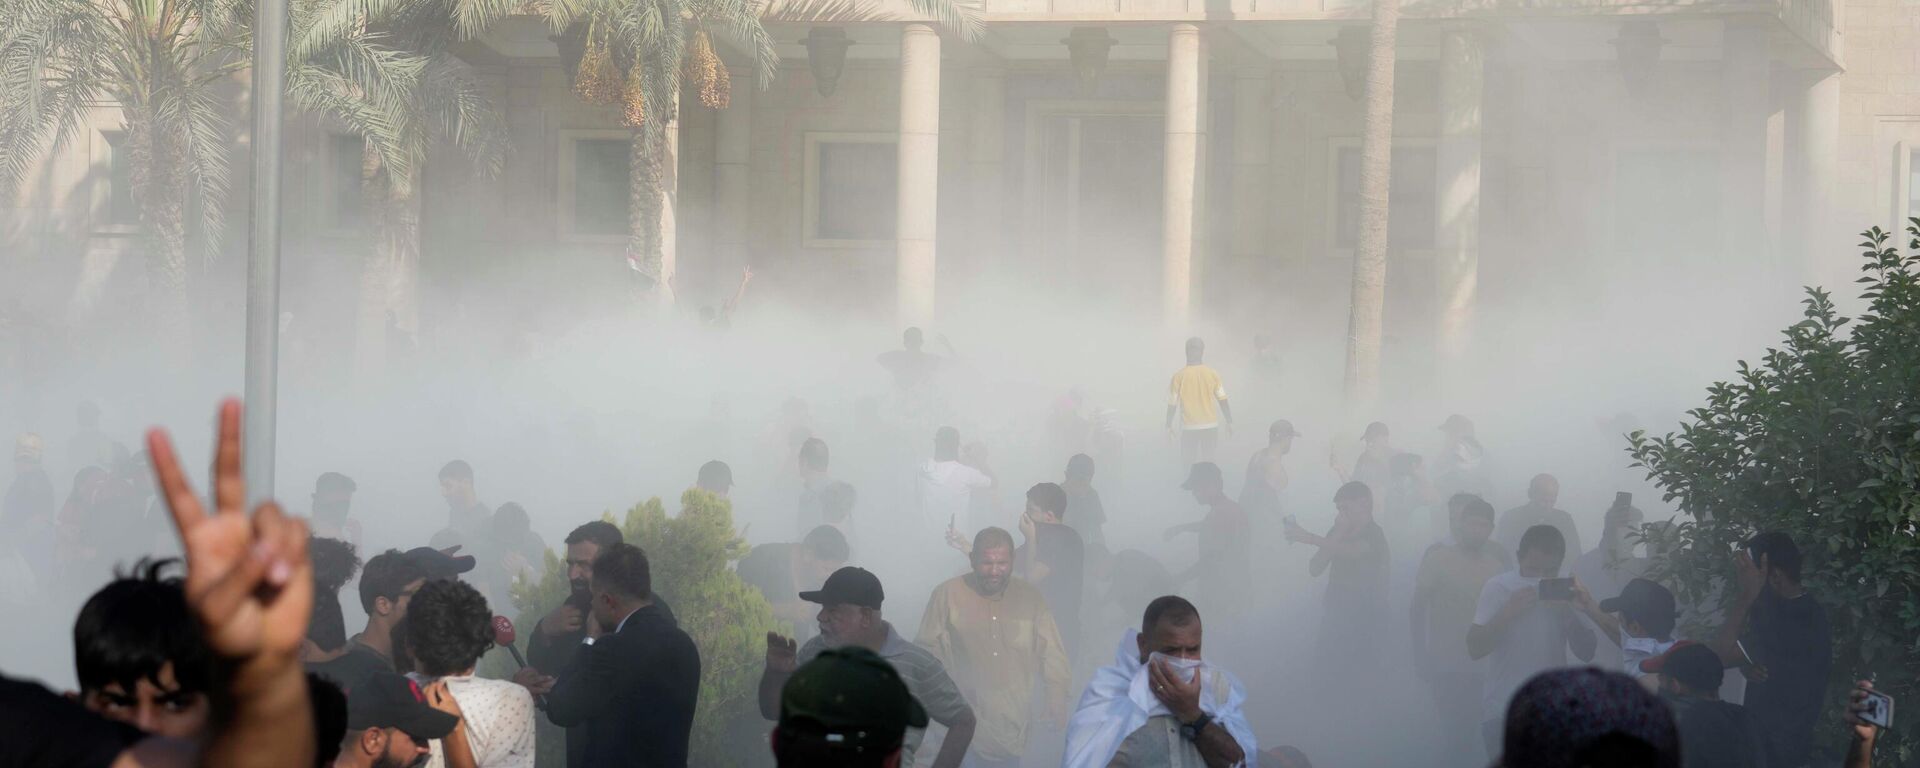 Iraqi security forces fire tear gas on followers of Shiite cleric Muqtada al-Sadr protesting inside the government palace grounds, in Baghdad, Iraq, Monday, Aug. 29, 2022 - Sputnik International, 1920, 30.08.2022